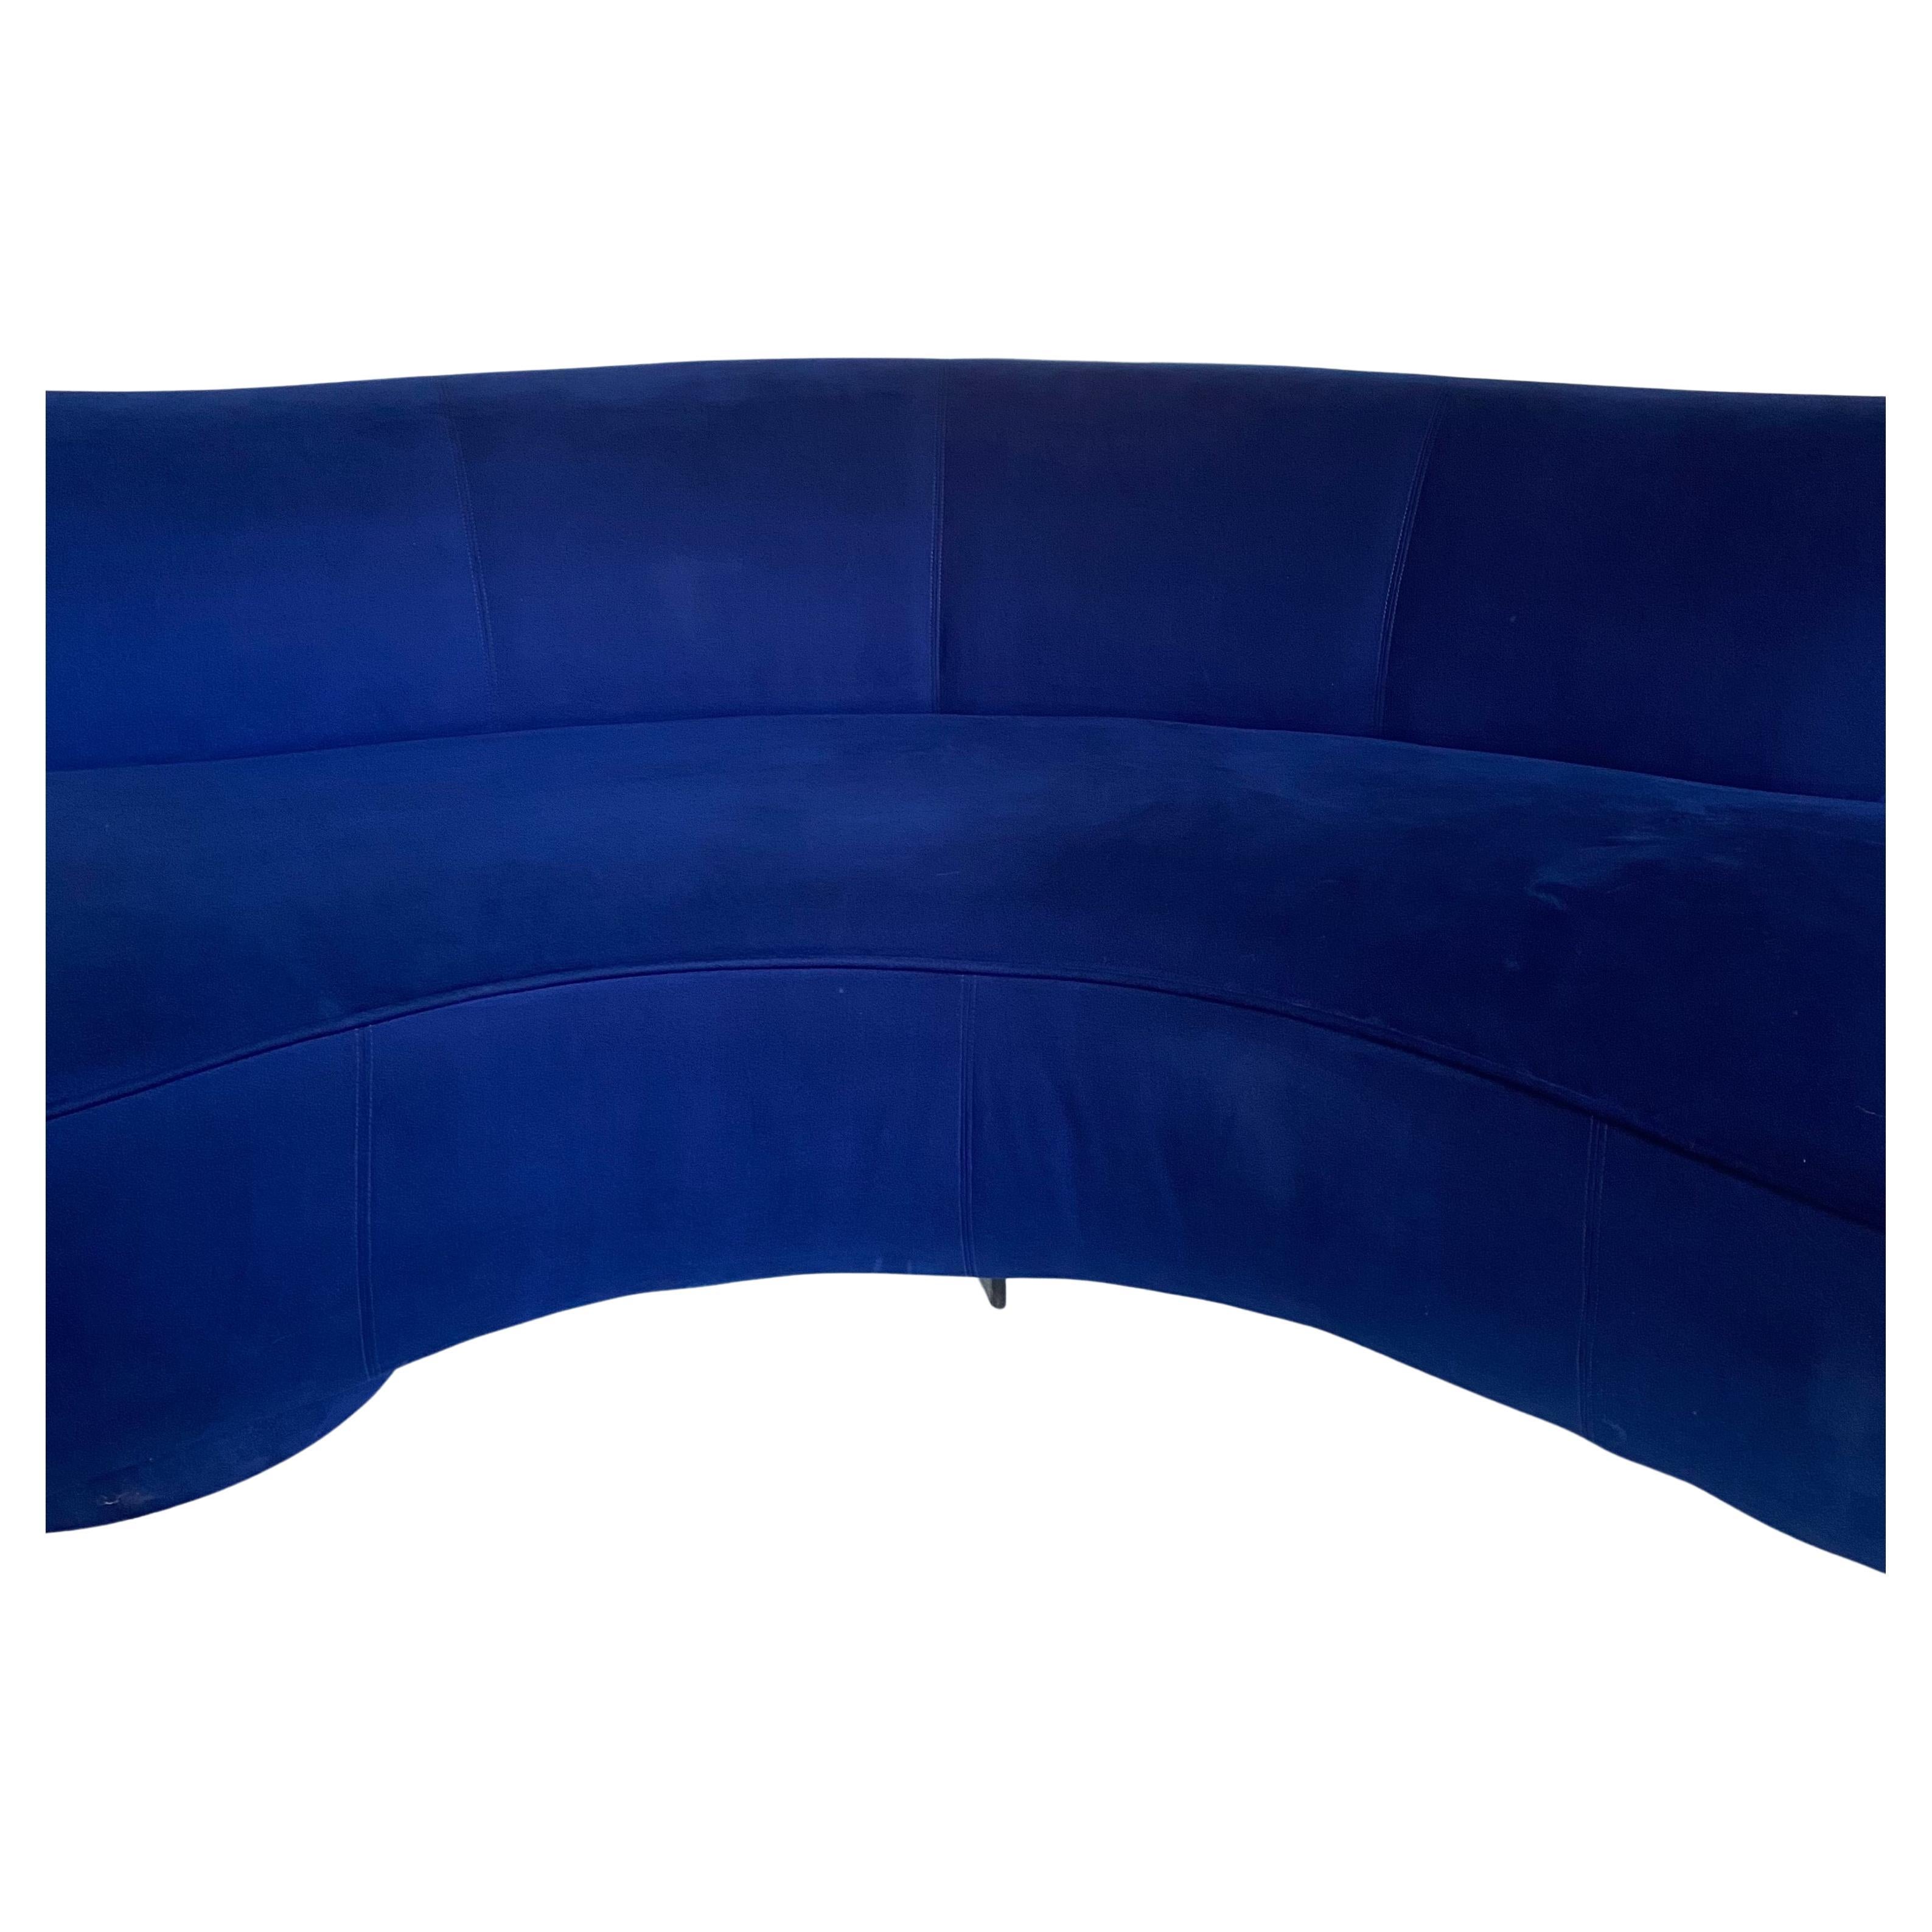 Vladimir Kagan Serpentine Cloud Sofa for Directional, Signed  For Sale 4